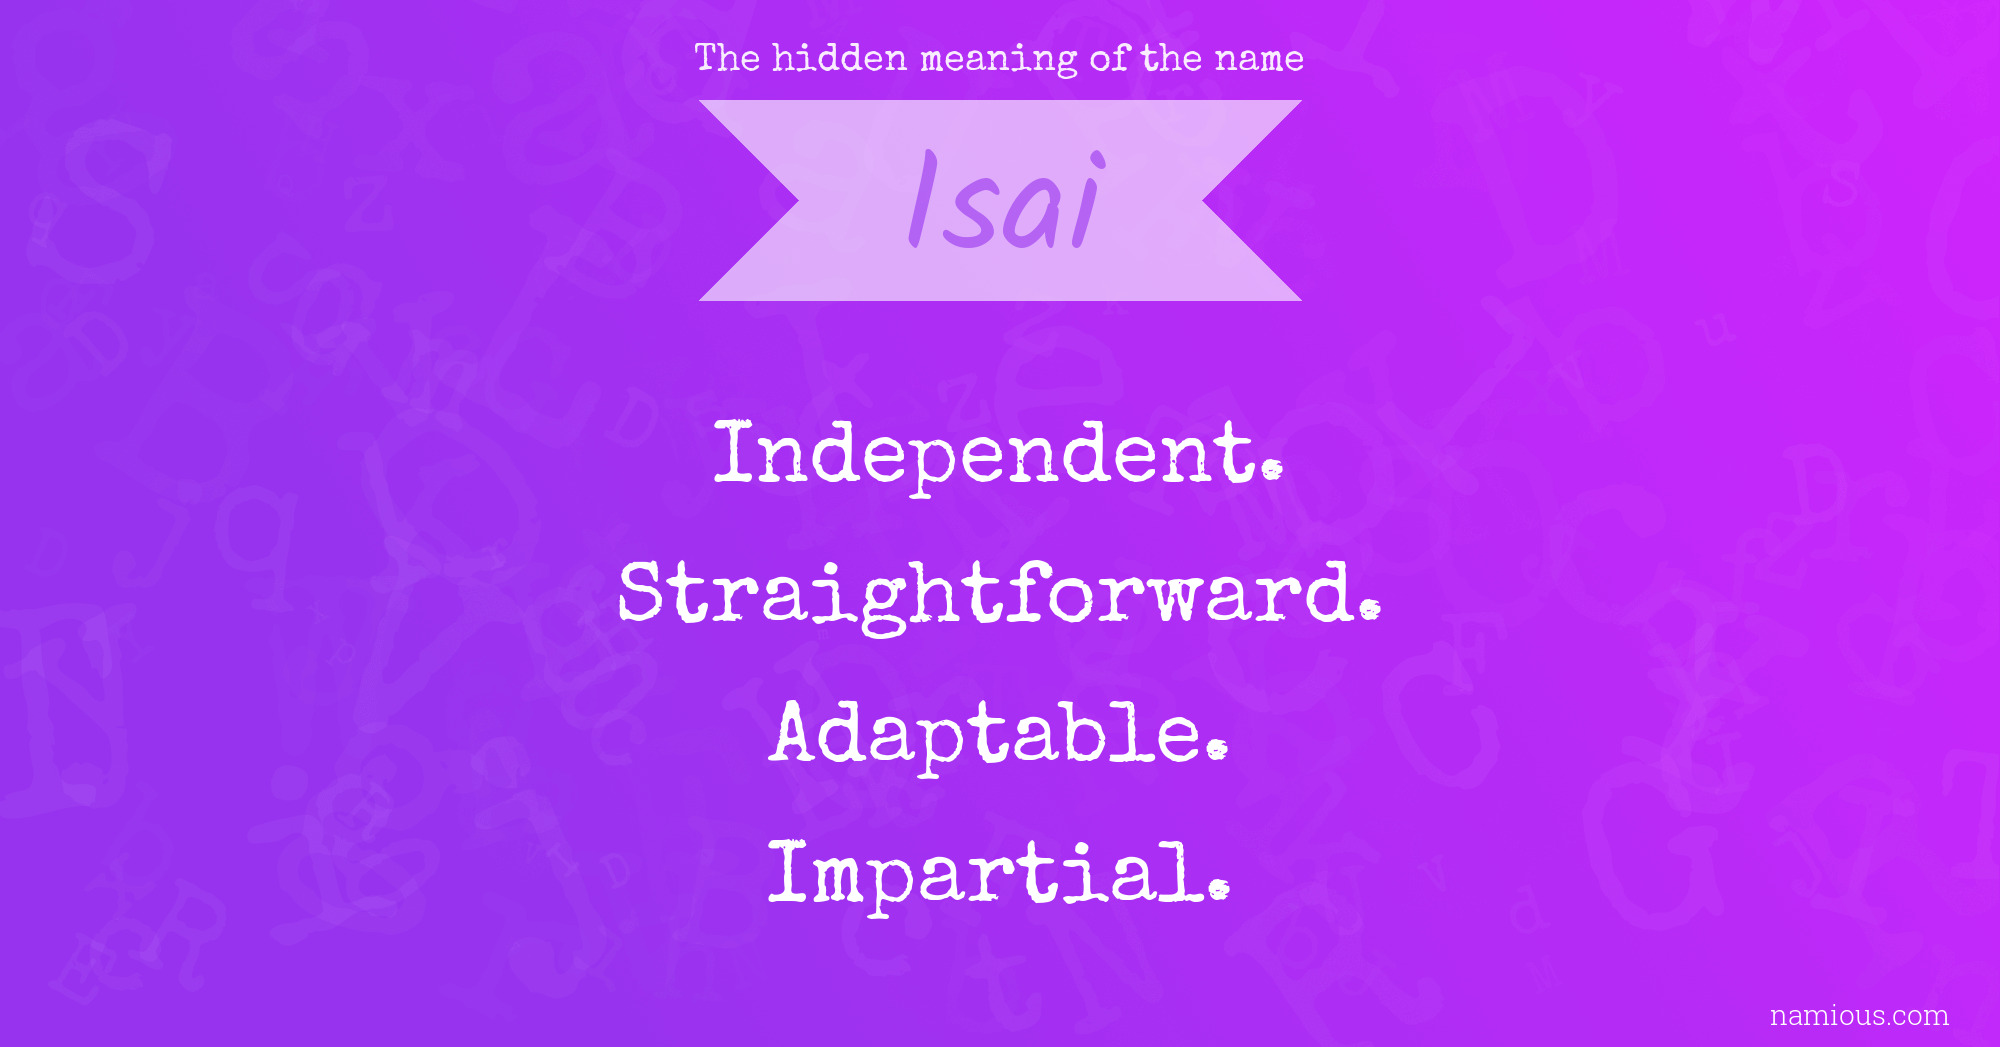 The hidden meaning of the name Isai